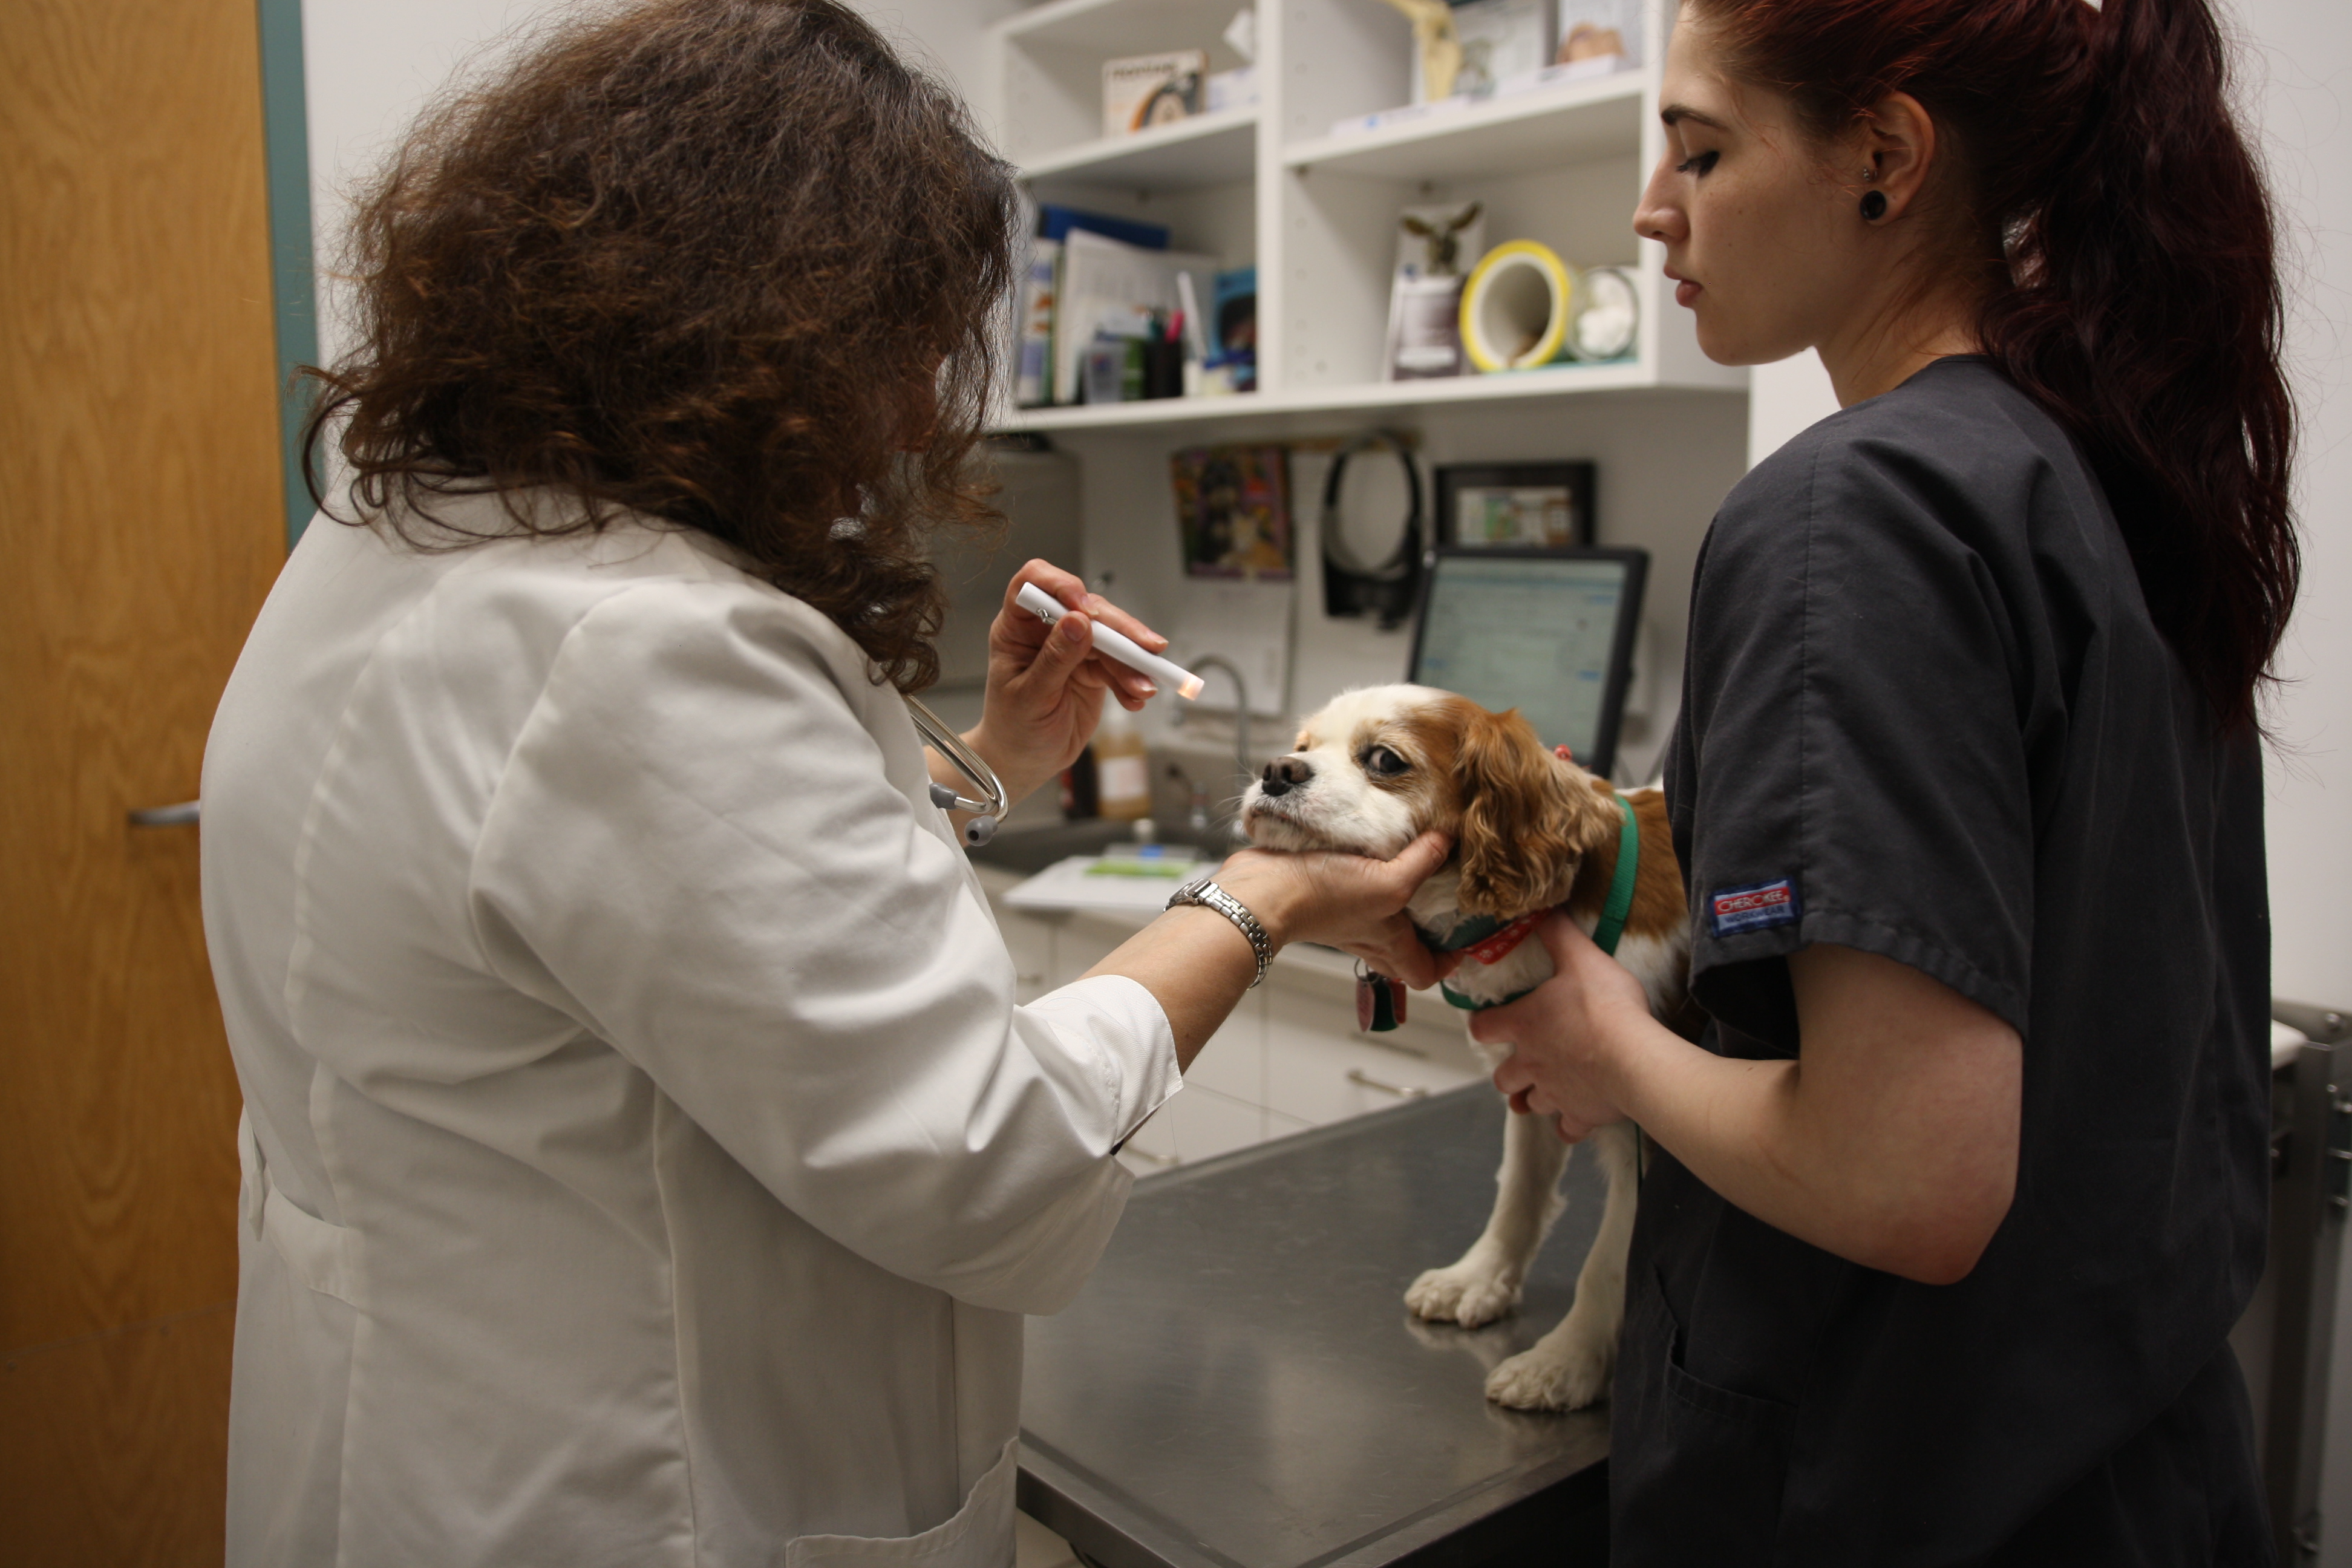 This pup is giving us some side eye while Dr. Fixman examines her eyes! It’s important to check for discoloration, discharge, proper light response, and more.